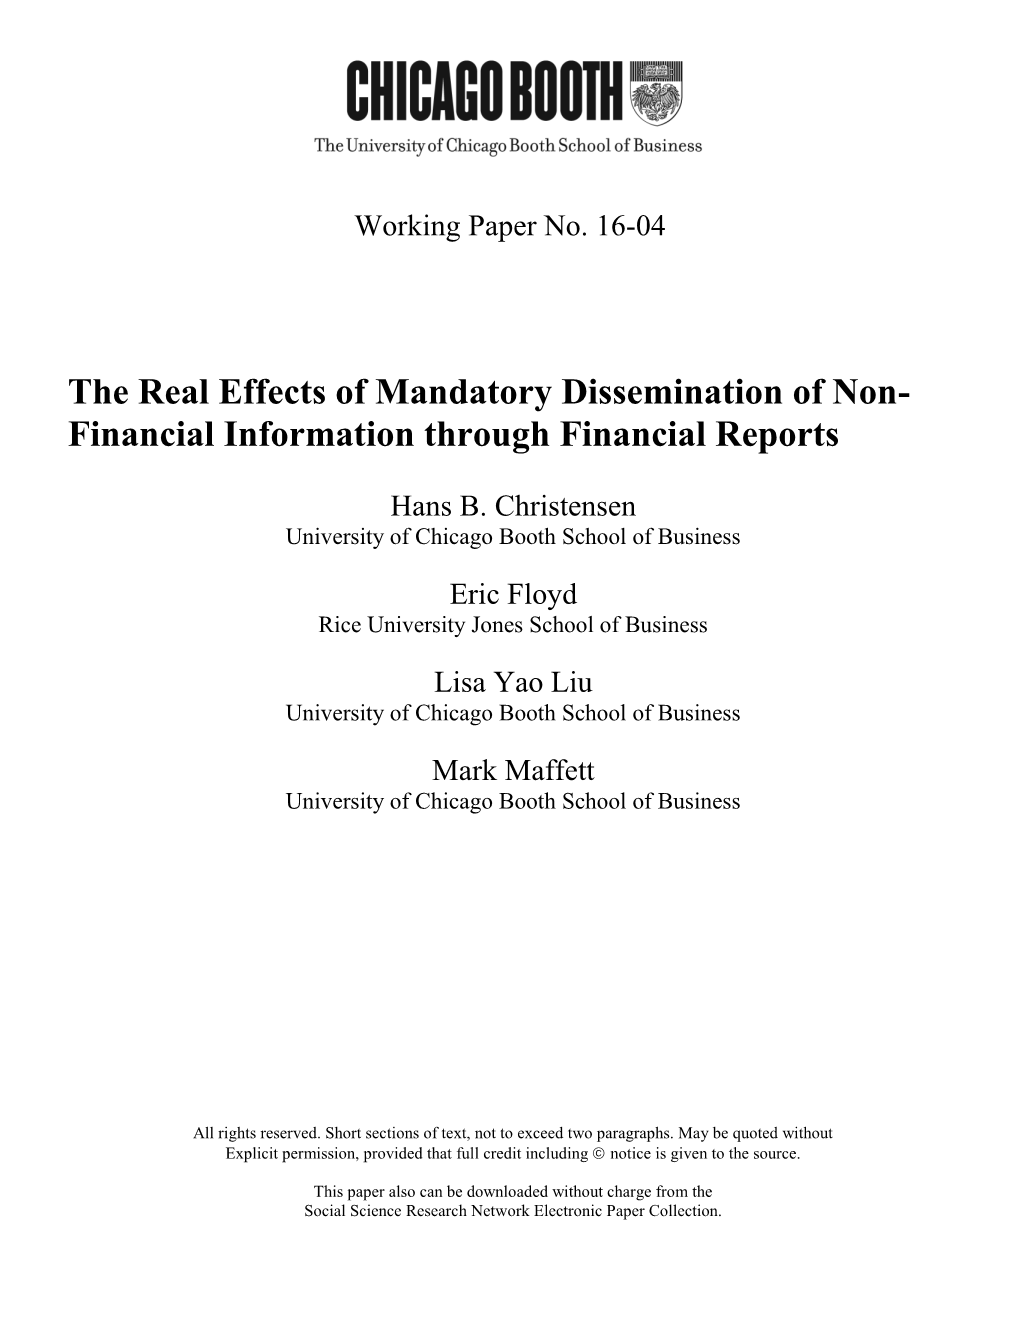 The Real Effects of Mandatory Dissemination of Non- Financial Information Through Financial Reports